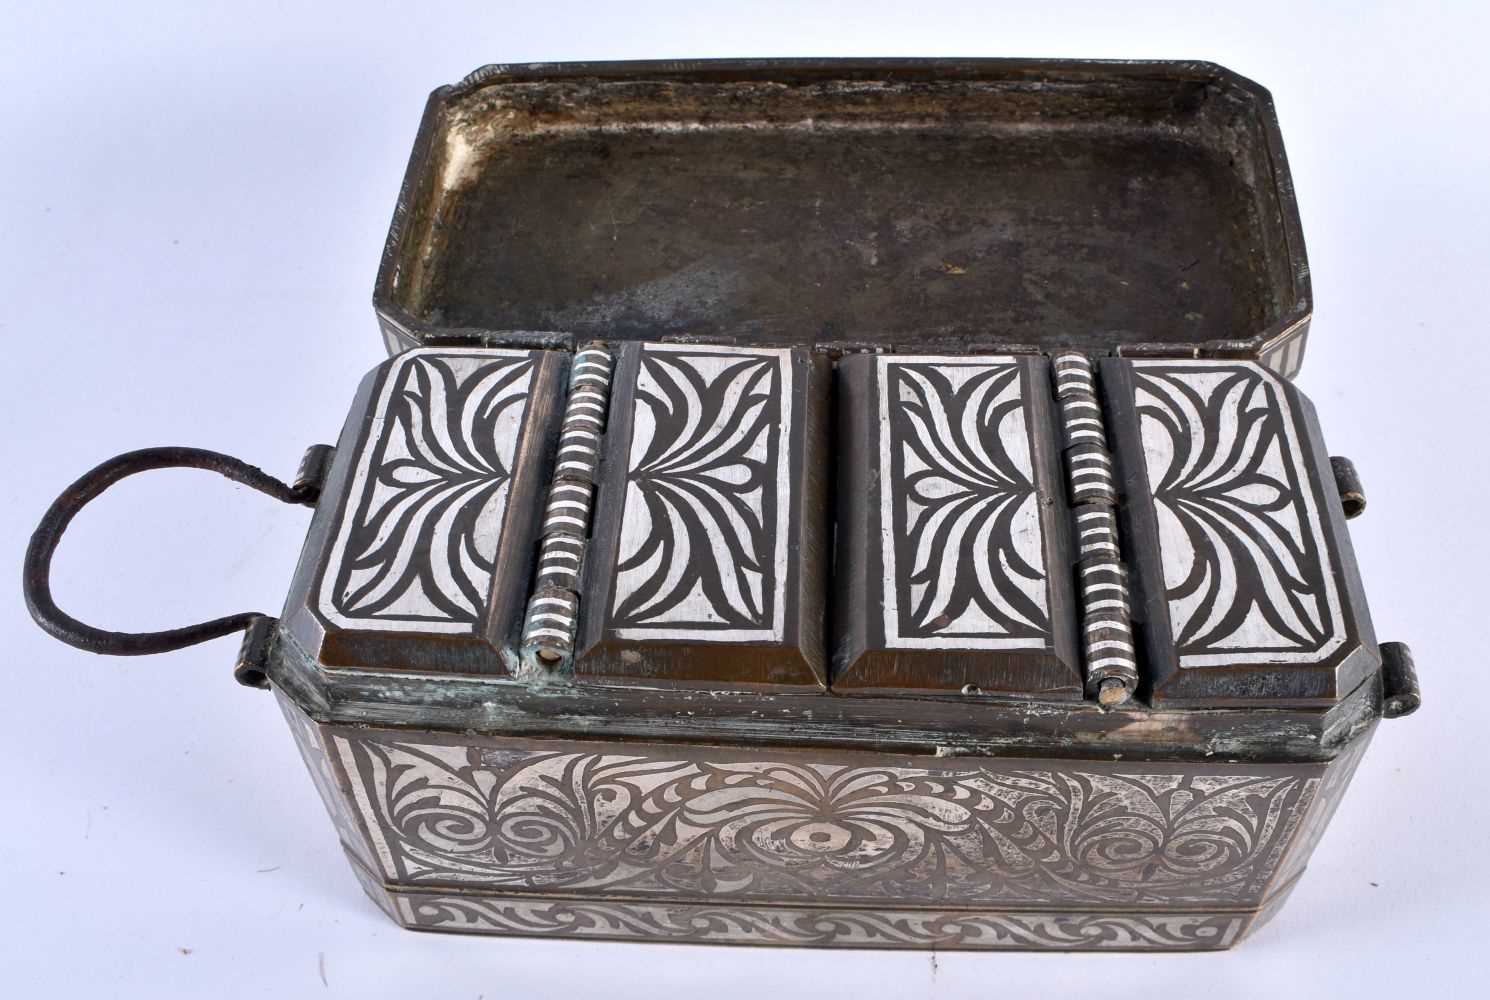 AN UNUSUAL 18TH CENTURY ISLAMIC PERSIAN SILVER INLAID BRONZE BOX decorative all over with foliage - Image 2 of 6